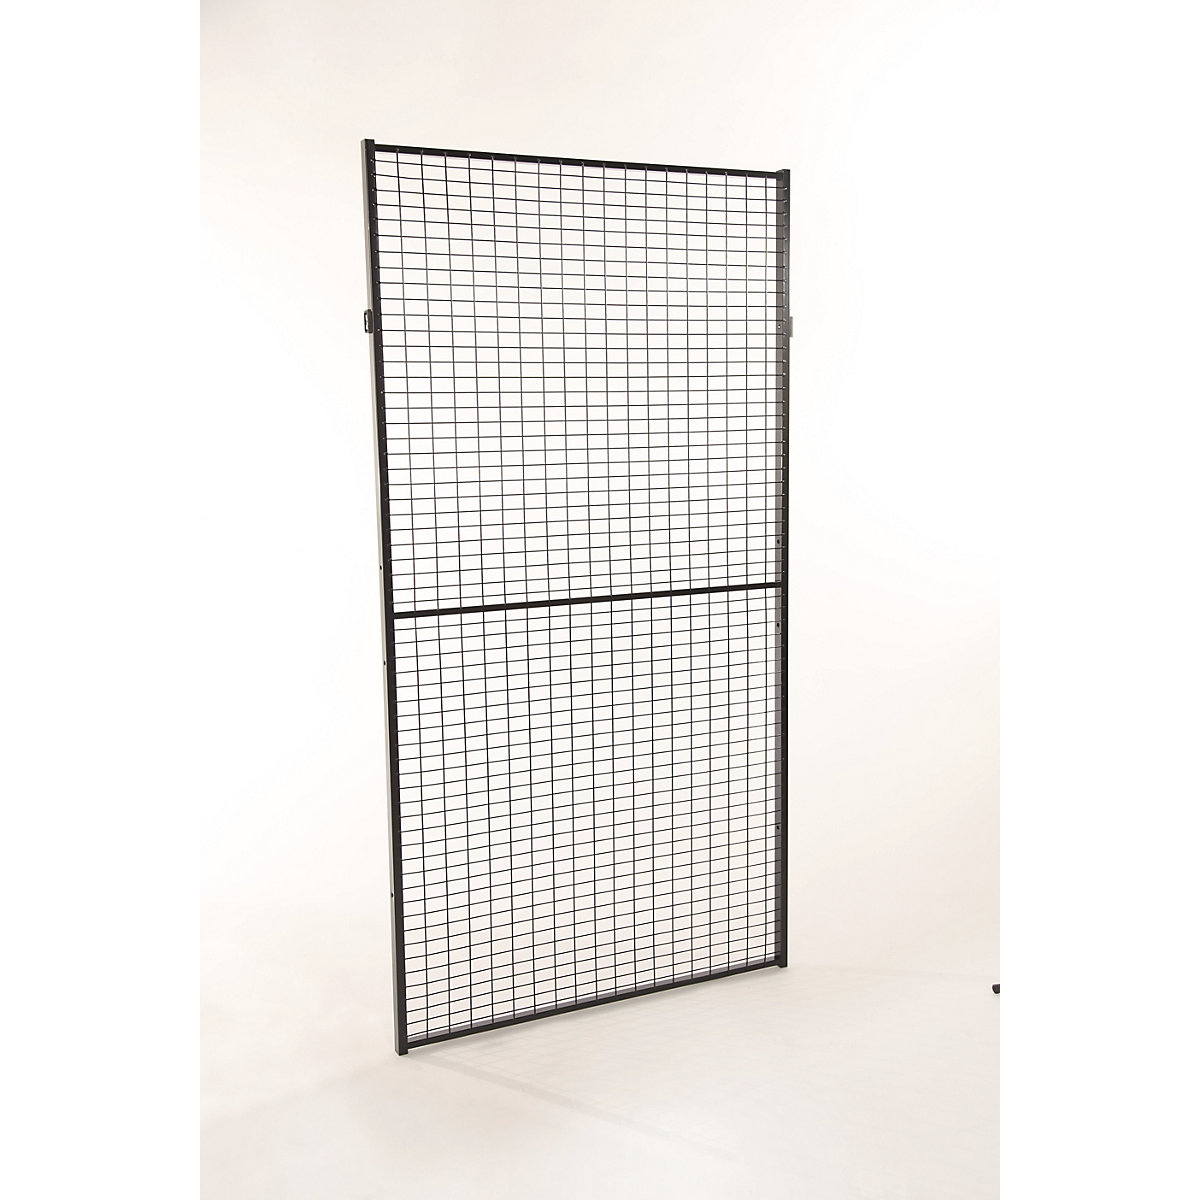 X-GUARD CLASSIC machine protective fencing, wall section – Axelent